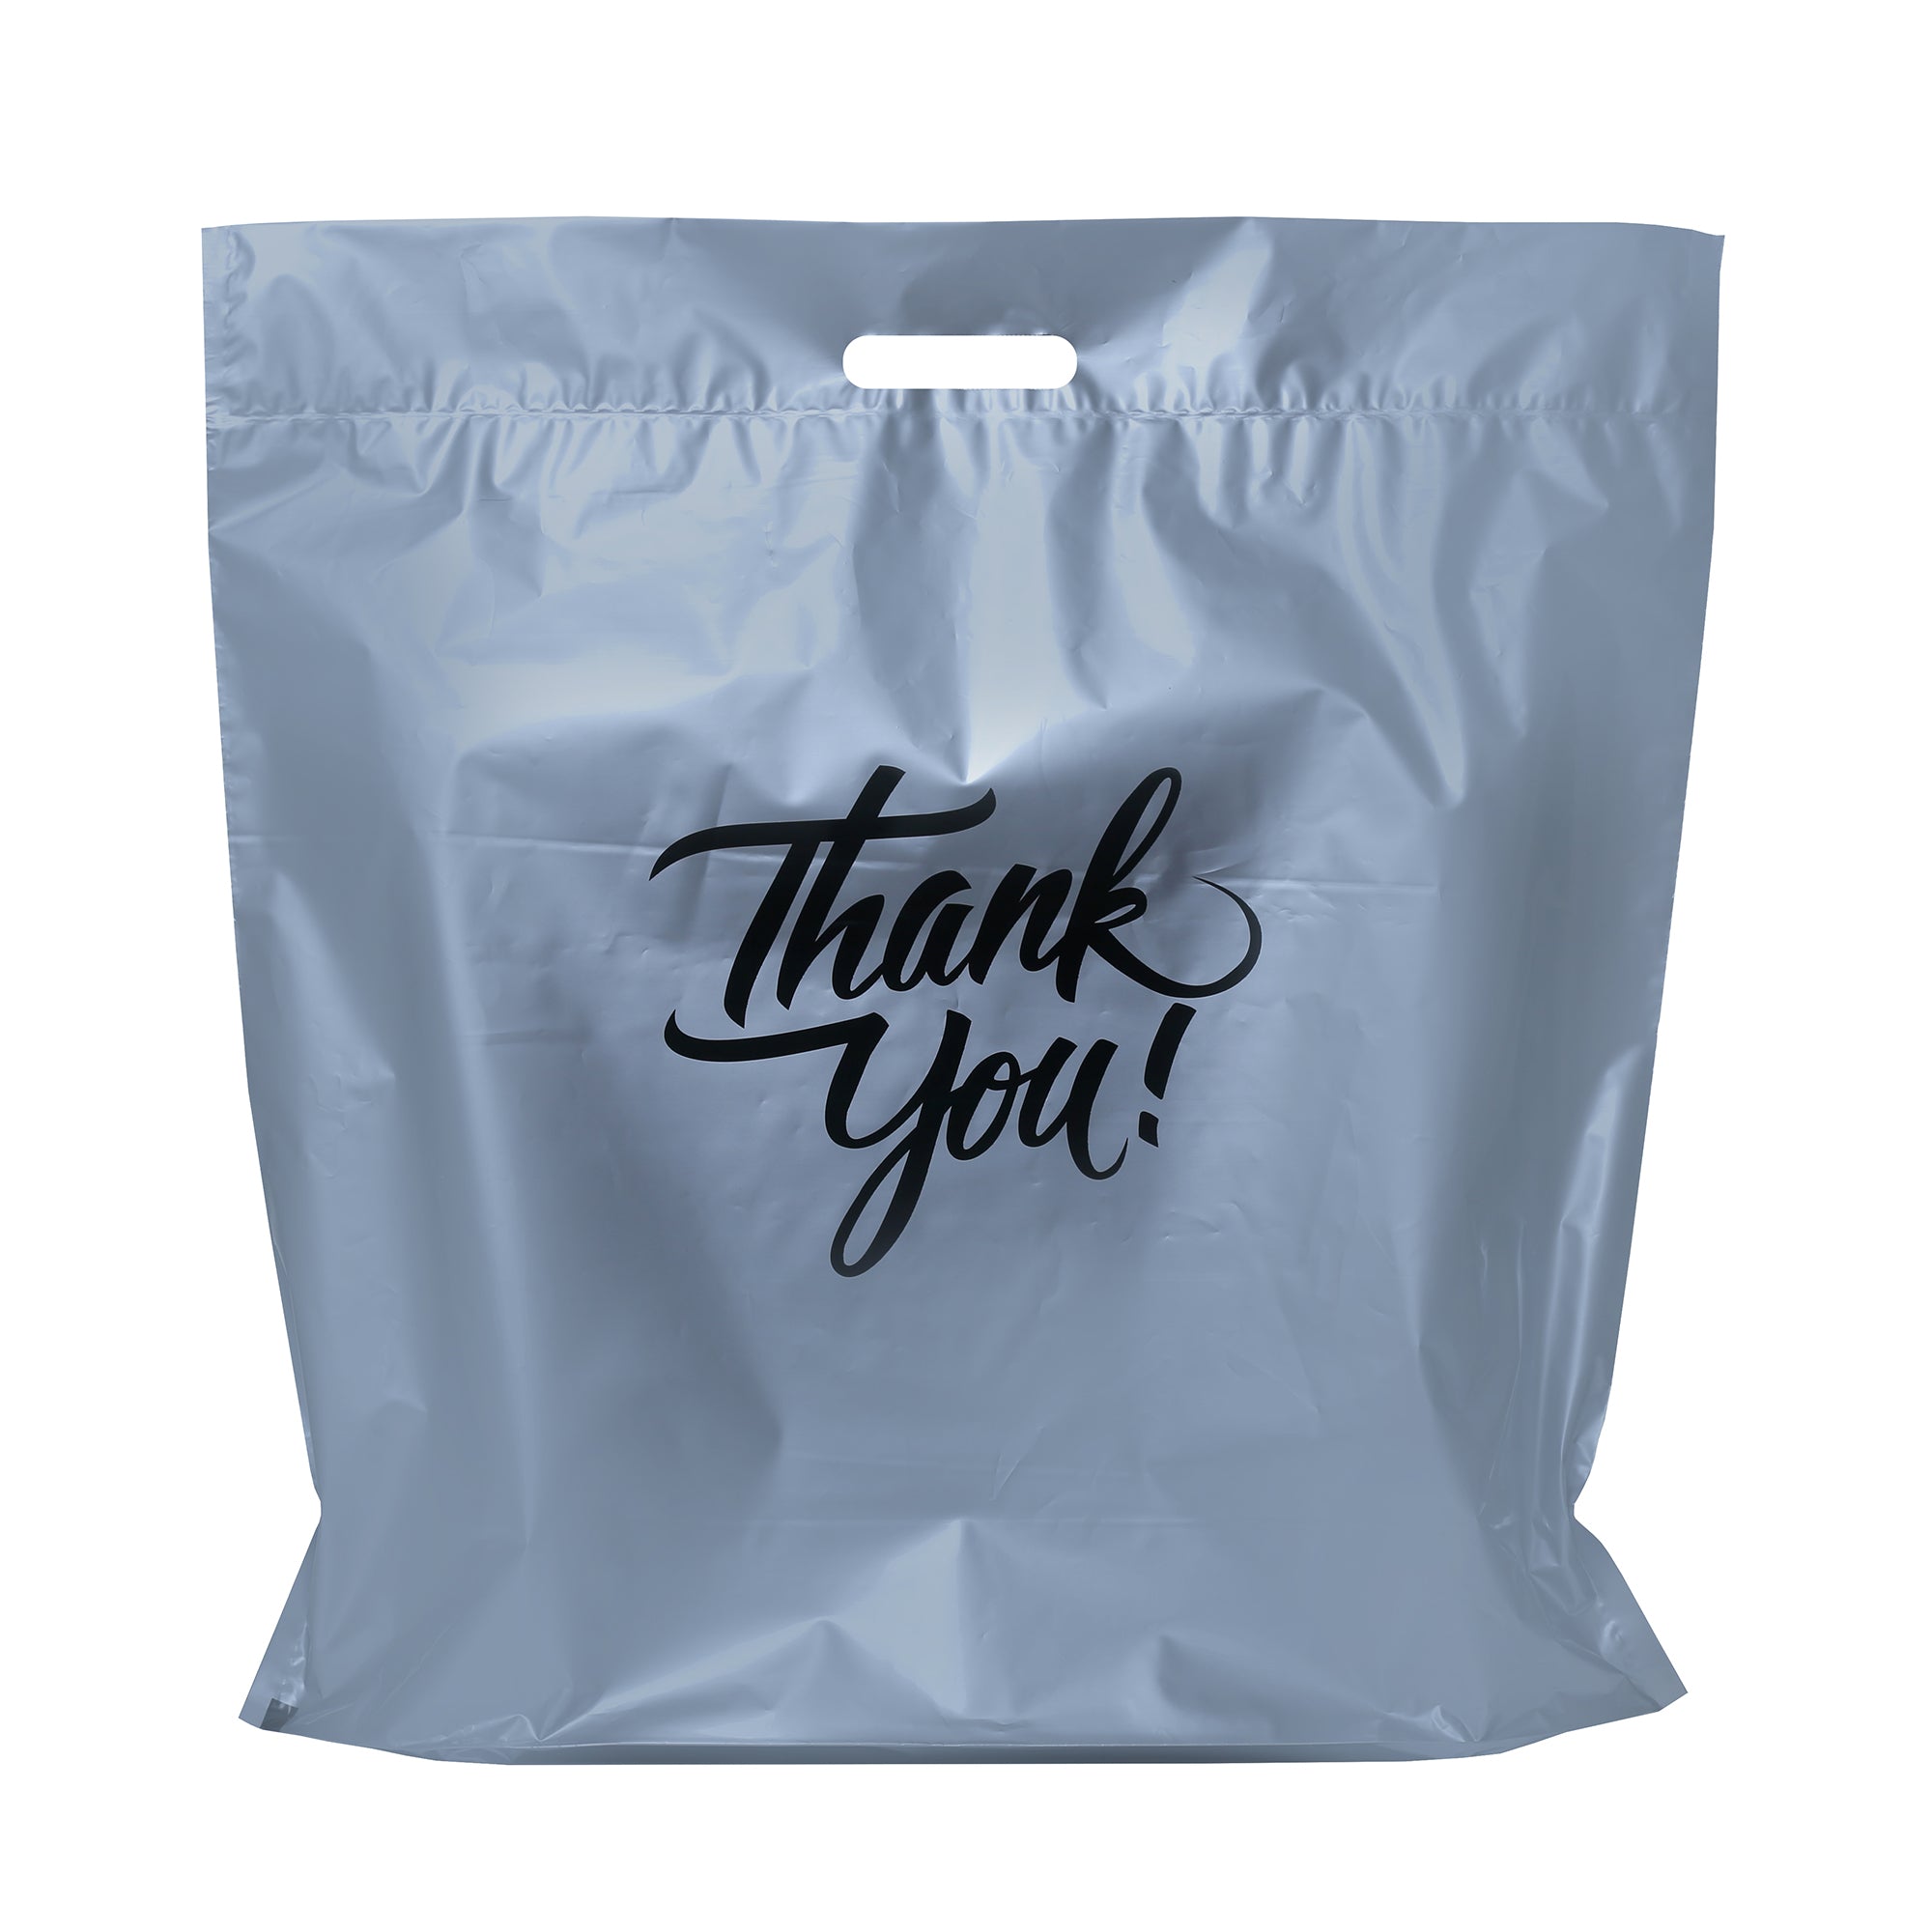 1 Kg All Sizes 1 kg to 20 kg Plastic Shopping Bags